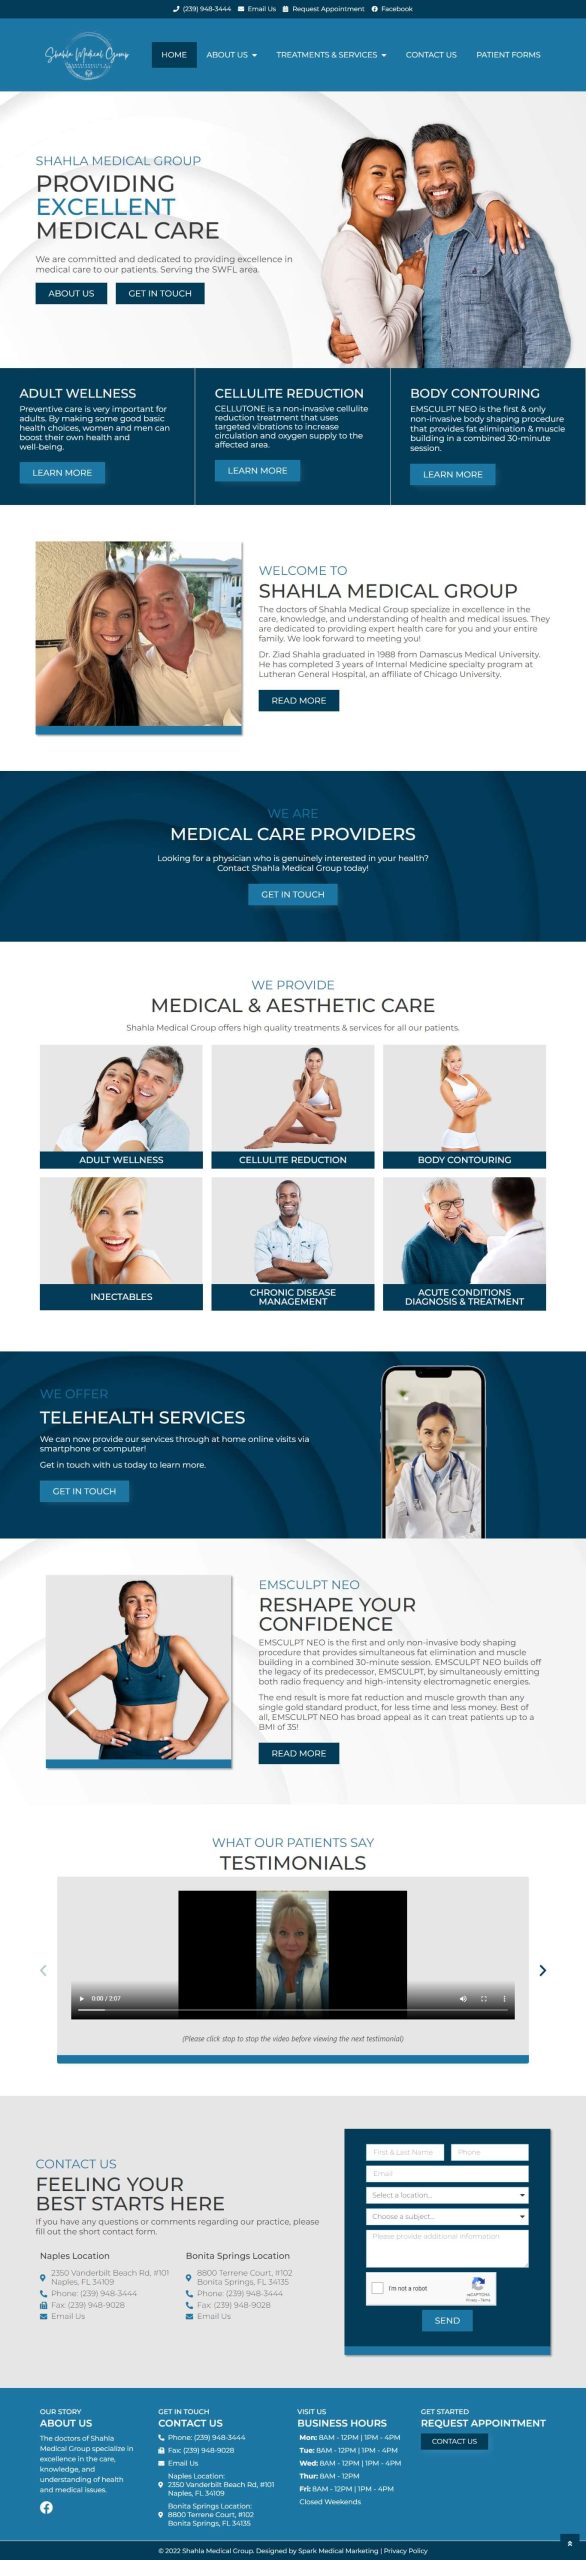 Shahla Medical Group Homepage